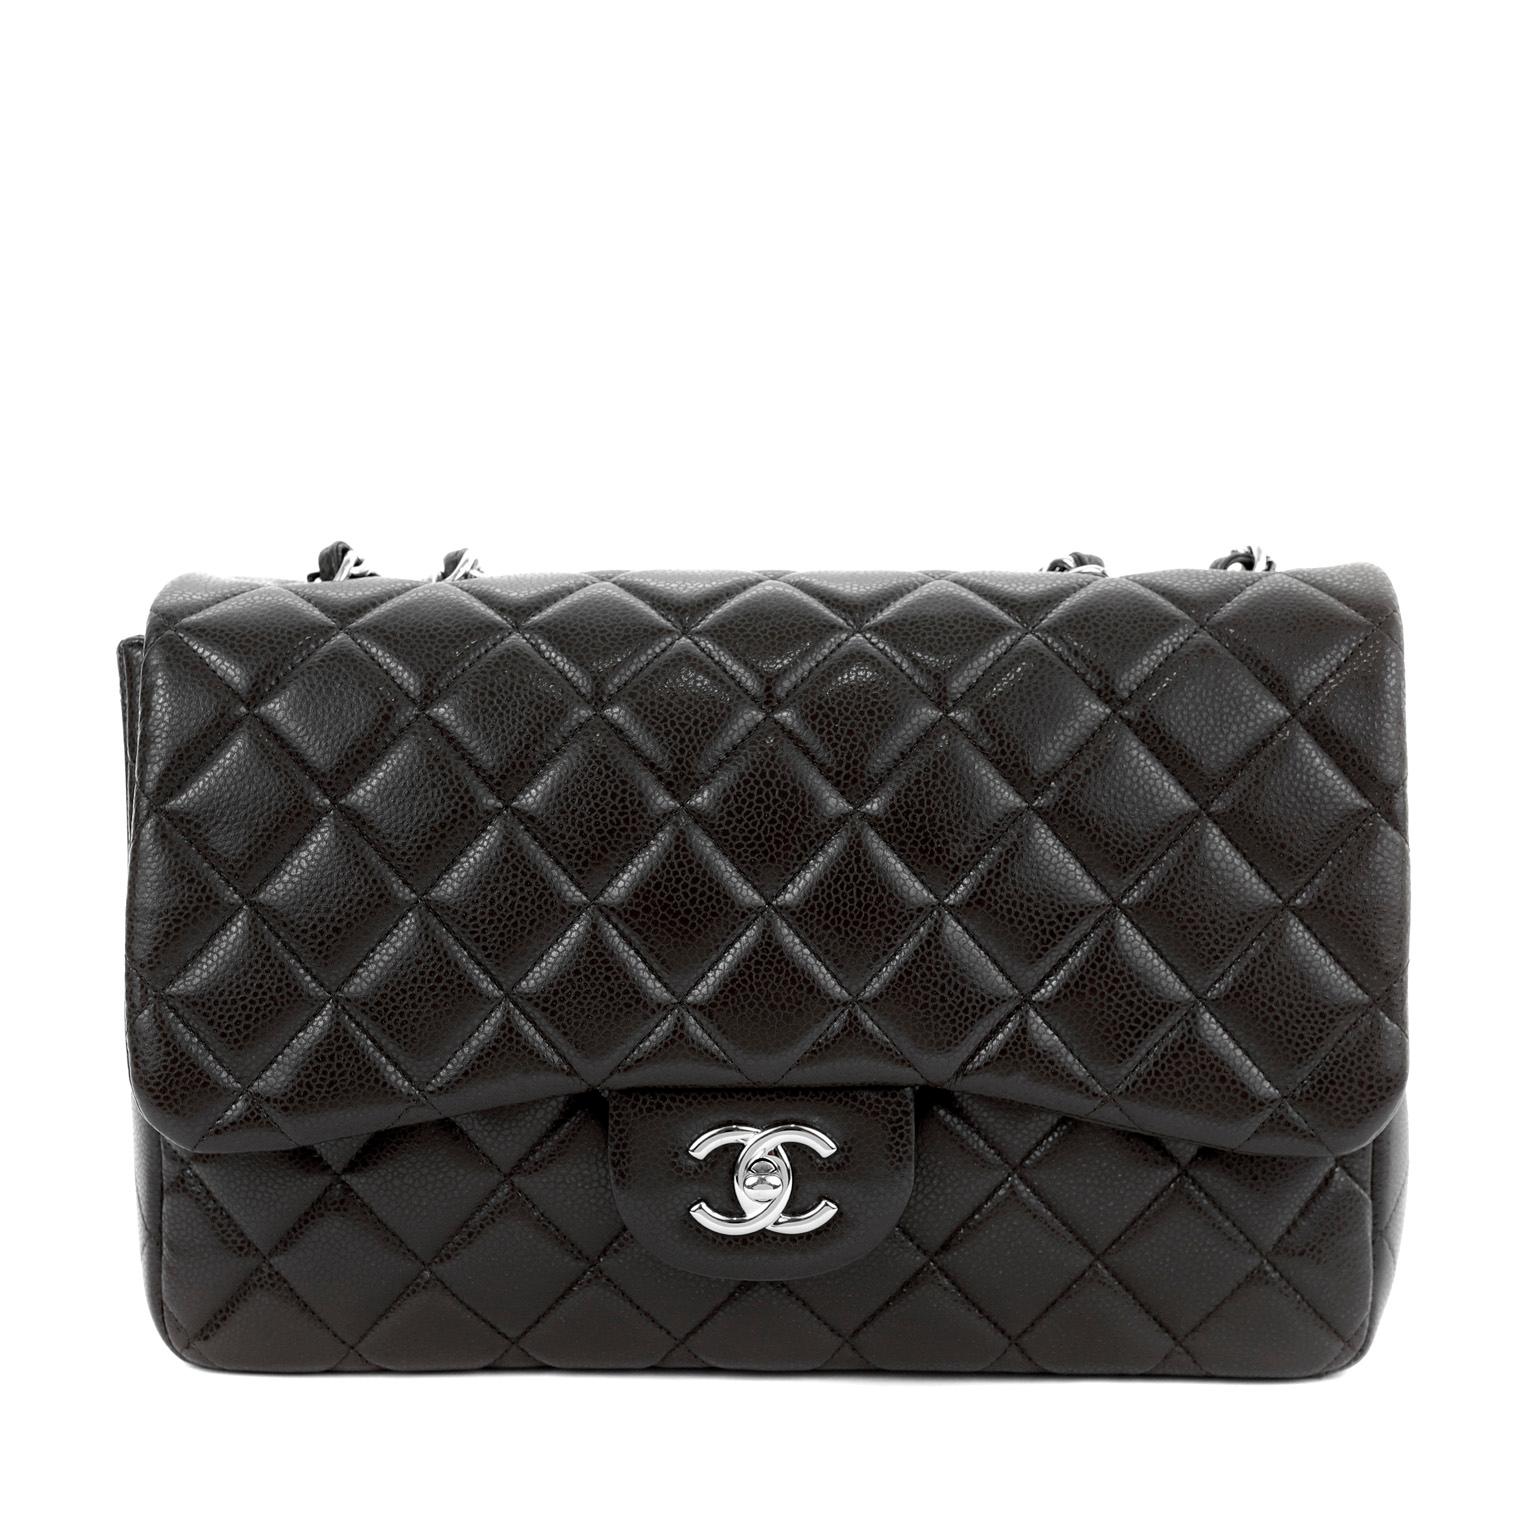 This authentic Chanel Chocolate Brown Caviar Jumbo Classic Flap Bag is in pristine condition.  A must have for any collector, the Jumbo Classic is elegant and timeless.

Durable and textured chocolate brown caviar leather is quilted in signature